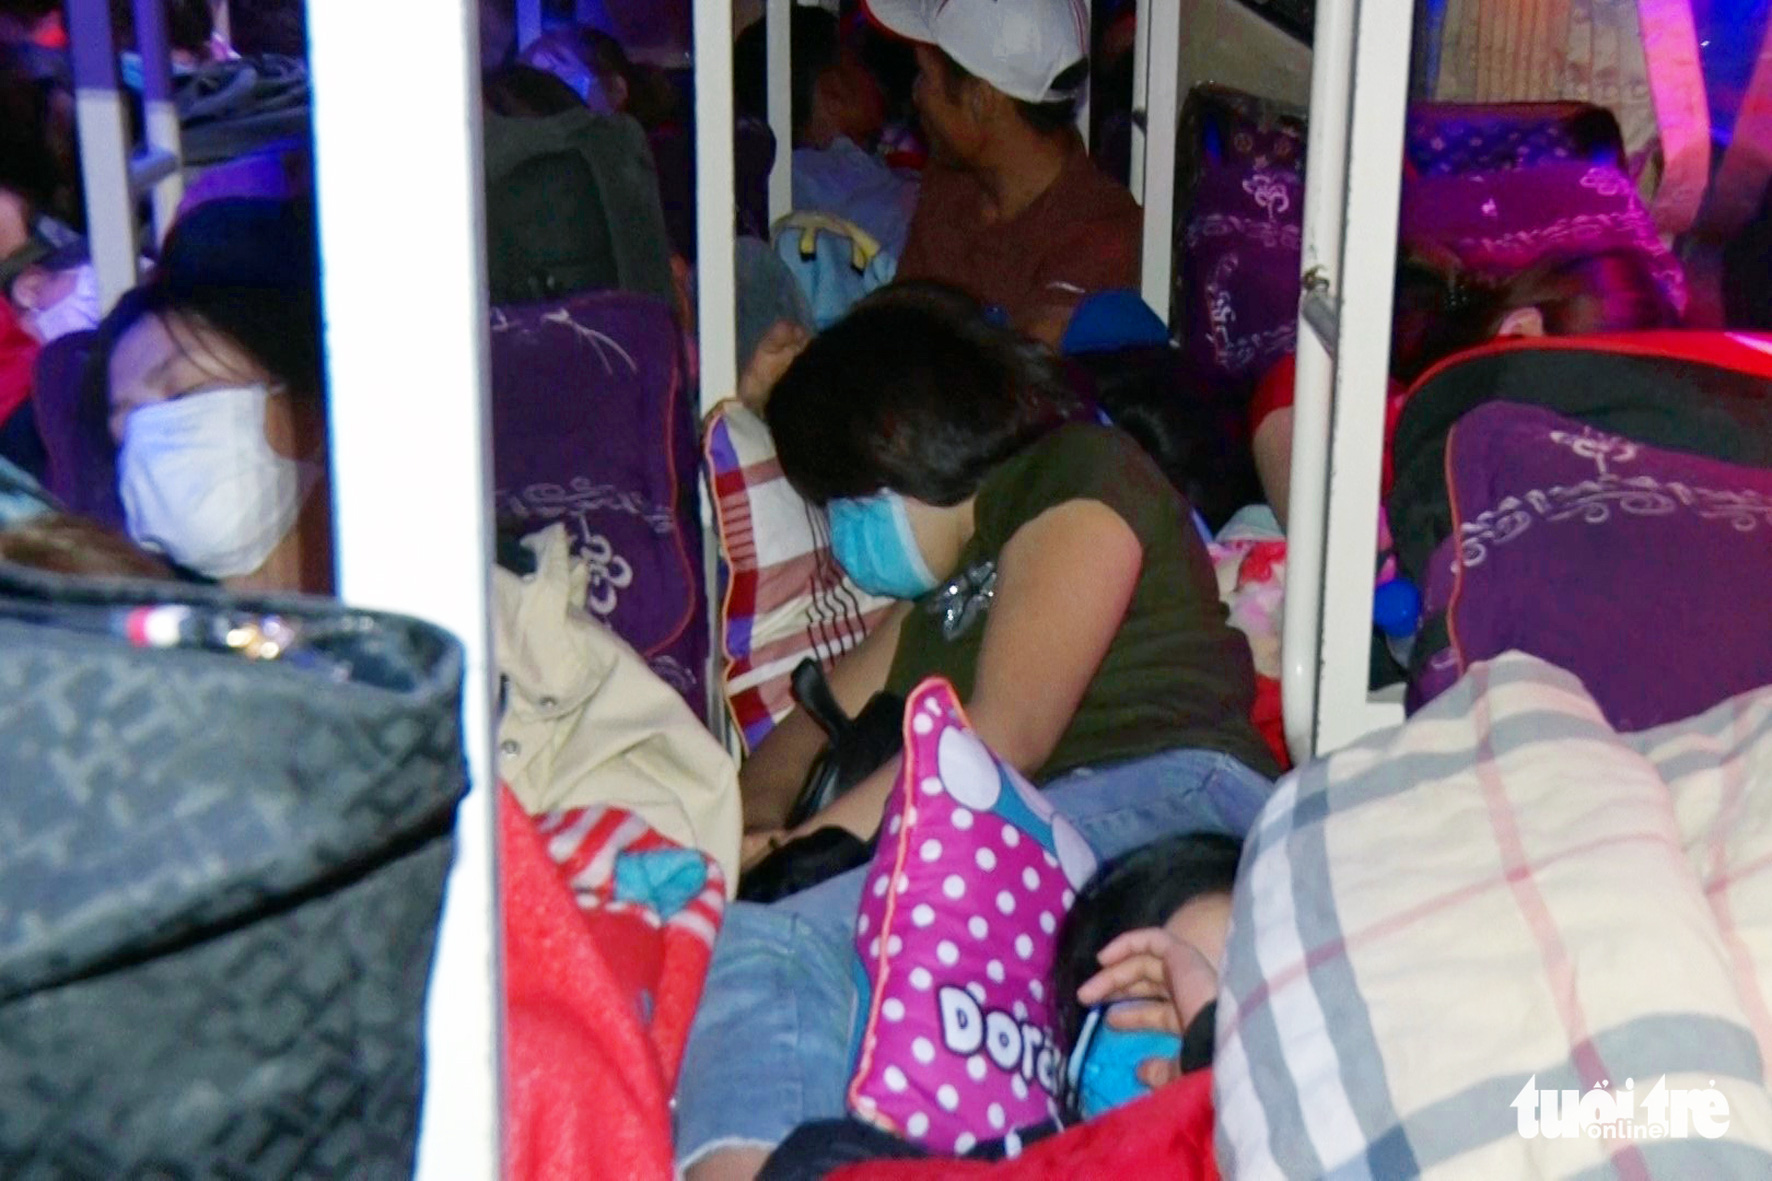 Nearly 100 packed inside sleeper bus in Vietnam’s Tet migration madness